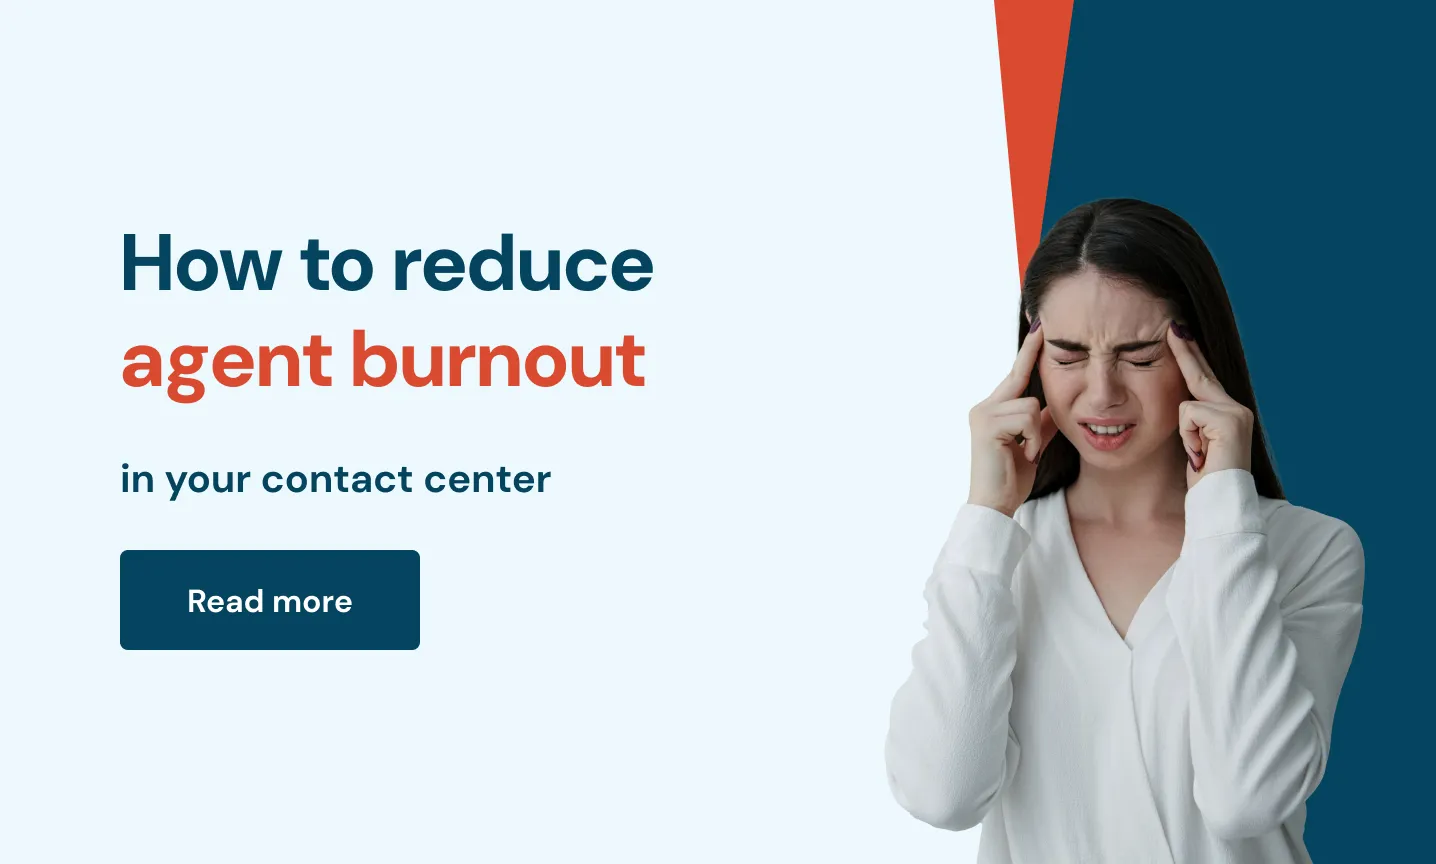 How to reduce agent burnout